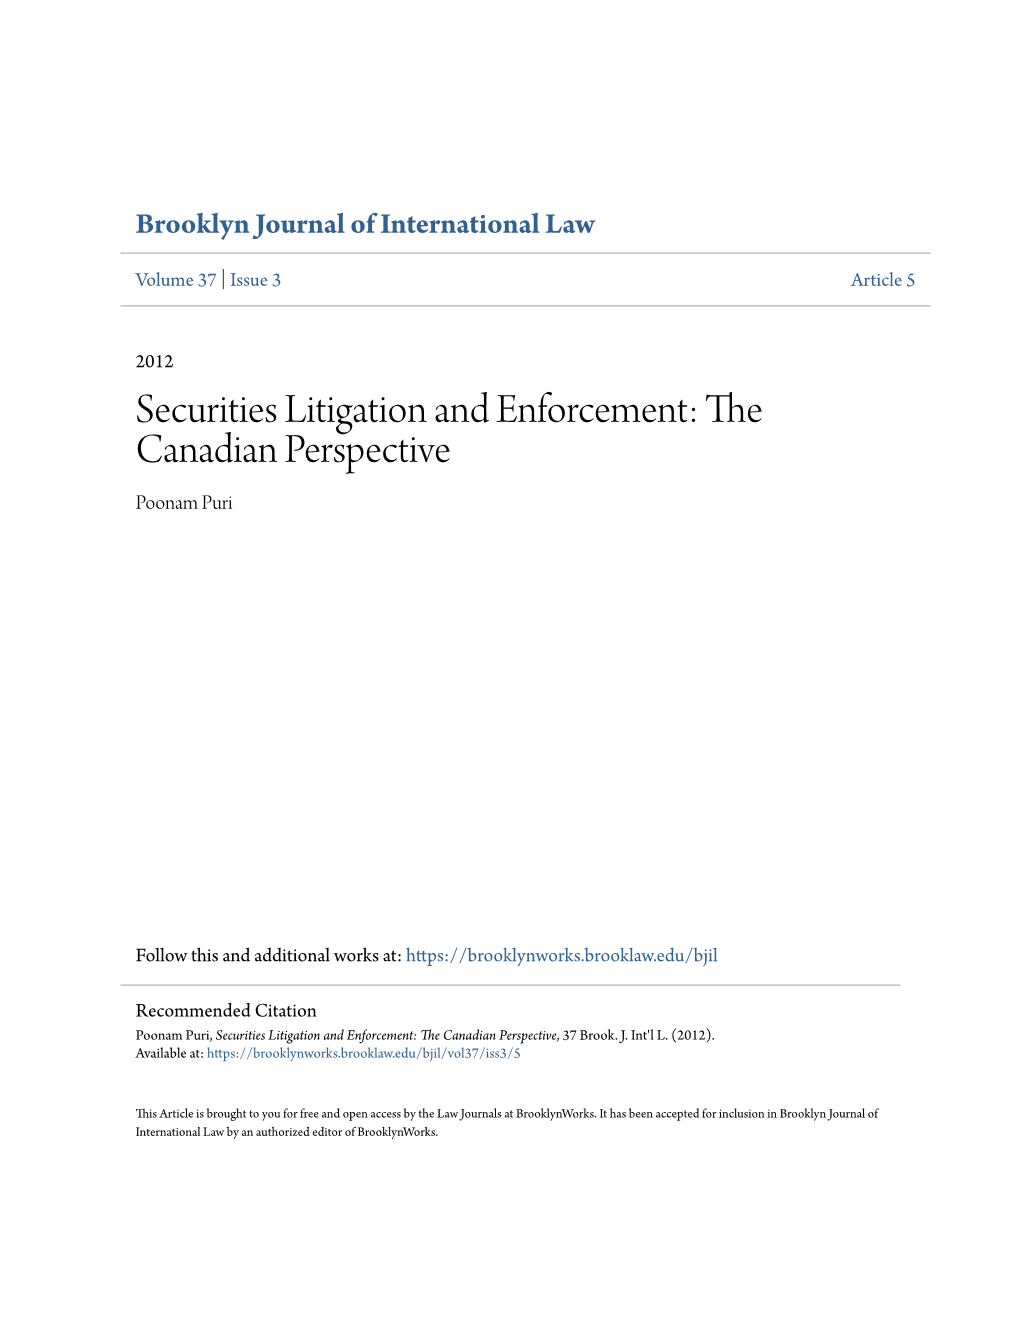 Securities Litigation and Enforcement: the Canadian Perspective Poonam Puri